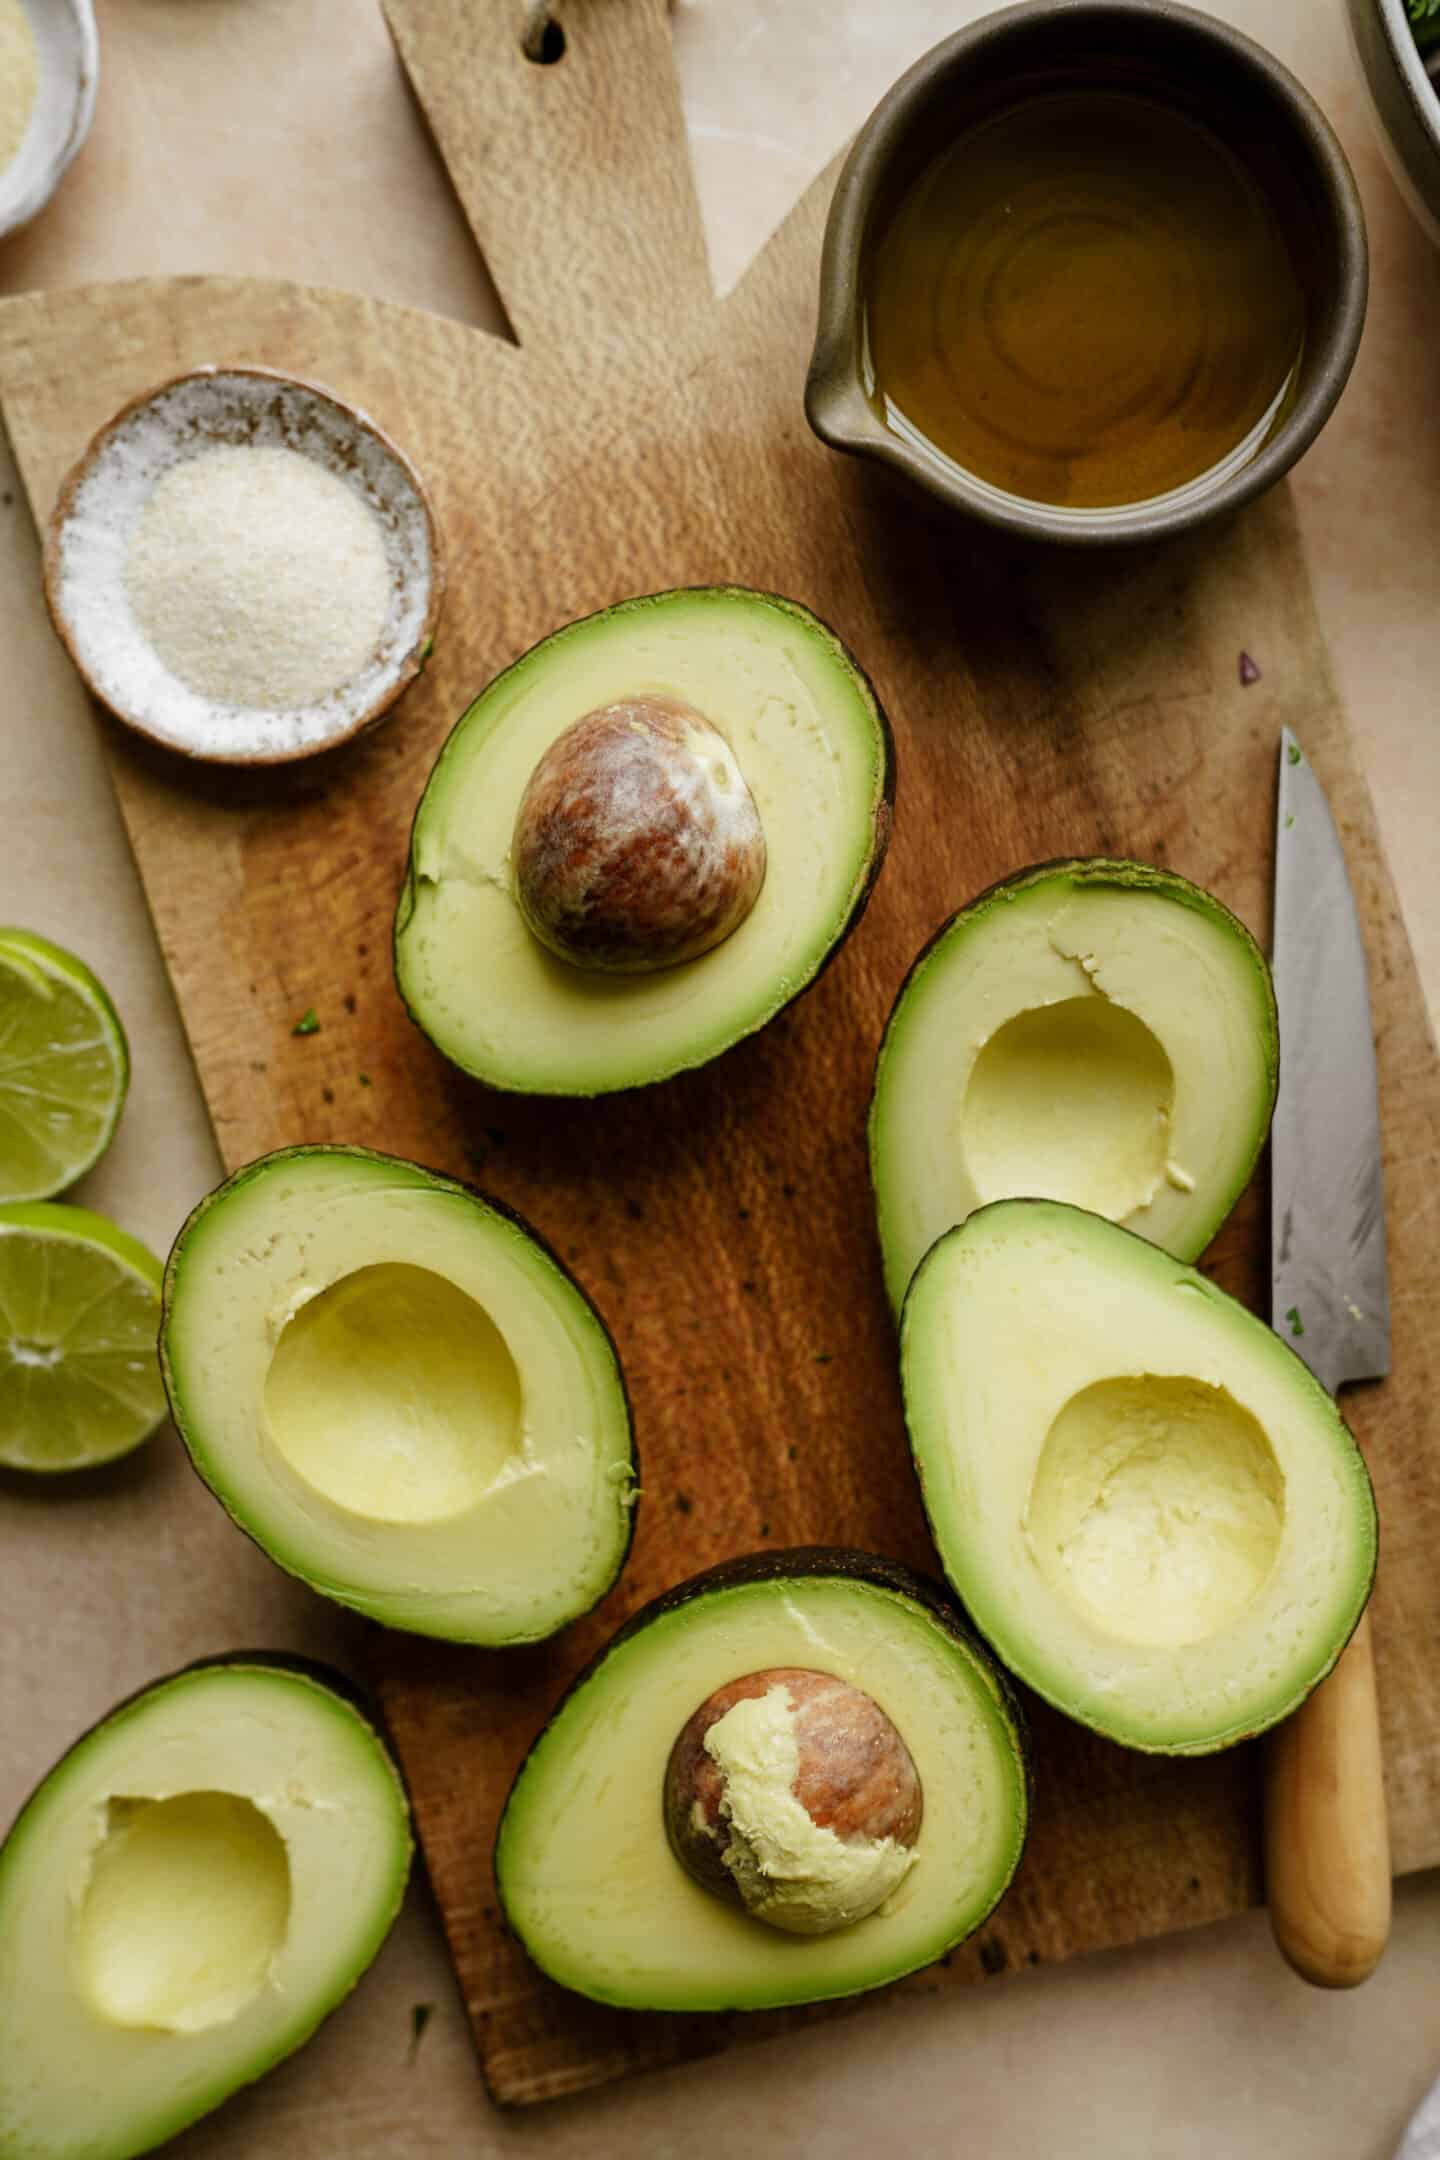 Learn how to make guacamole with me - photo of avocados cut in half on a cutting board